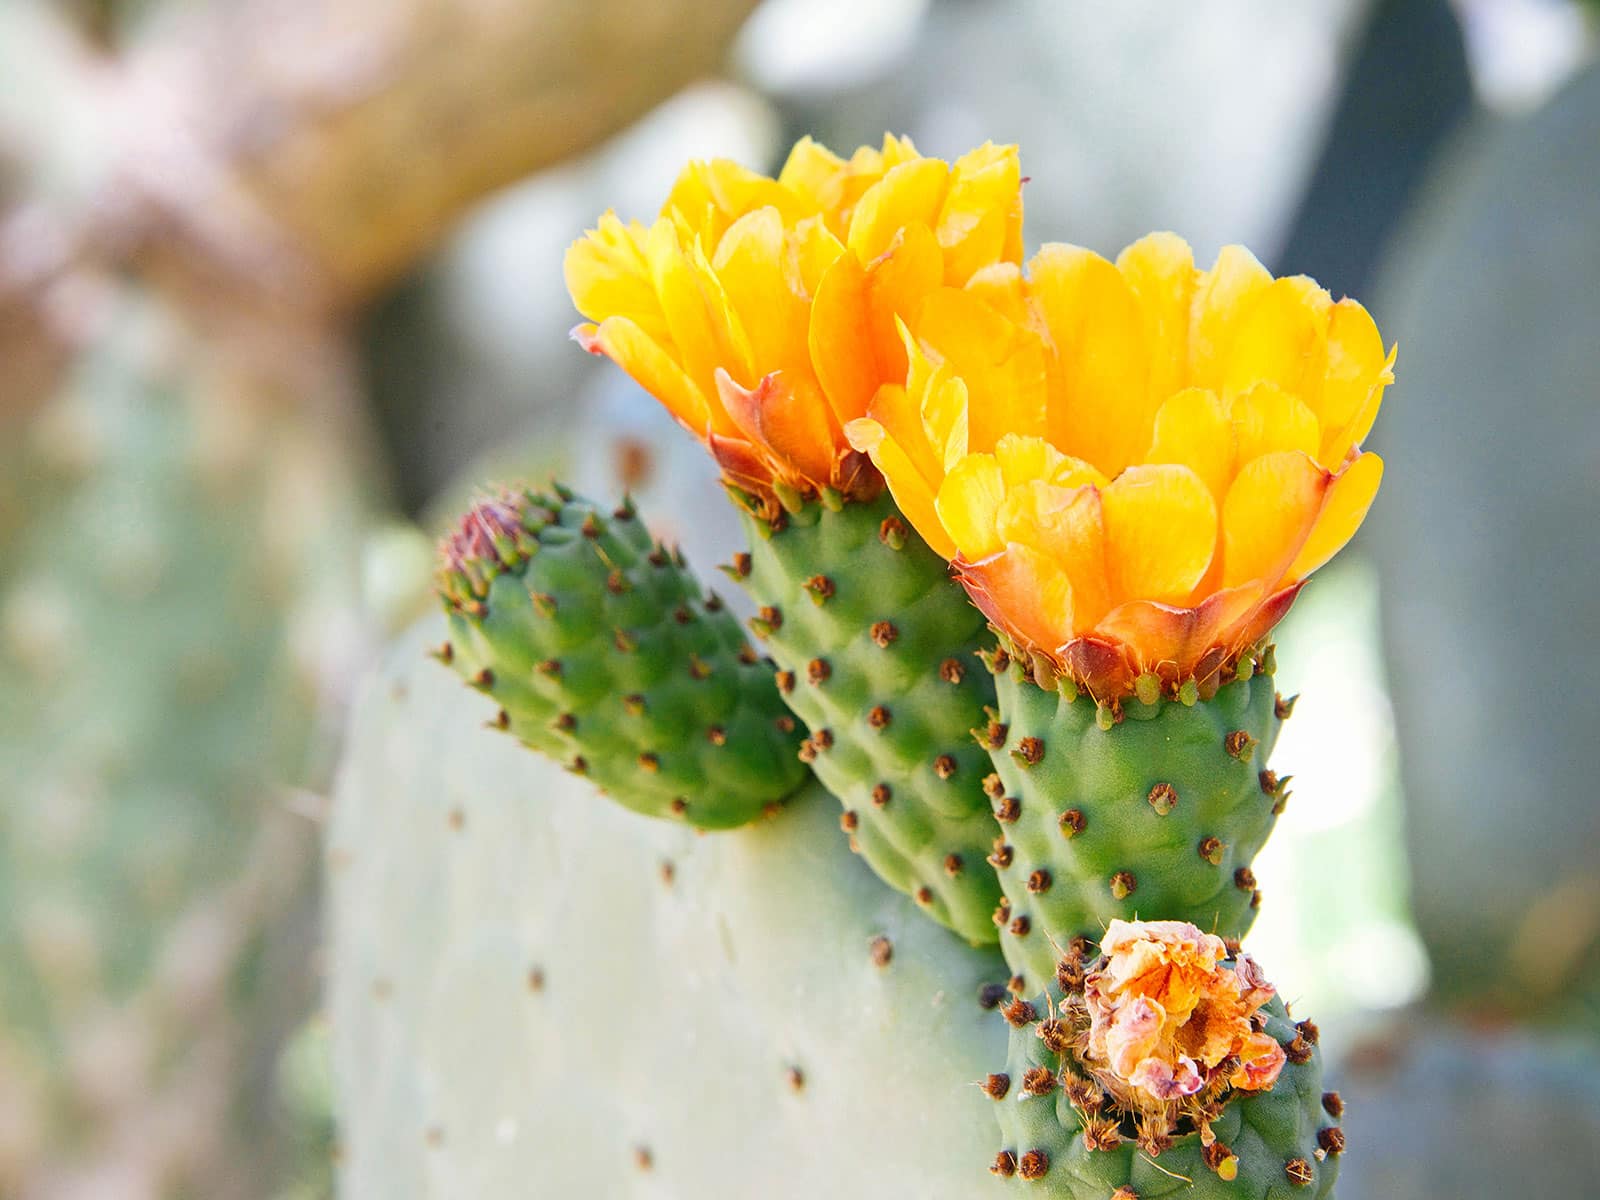 Prickly pear cactus with yellow flowers in bloom